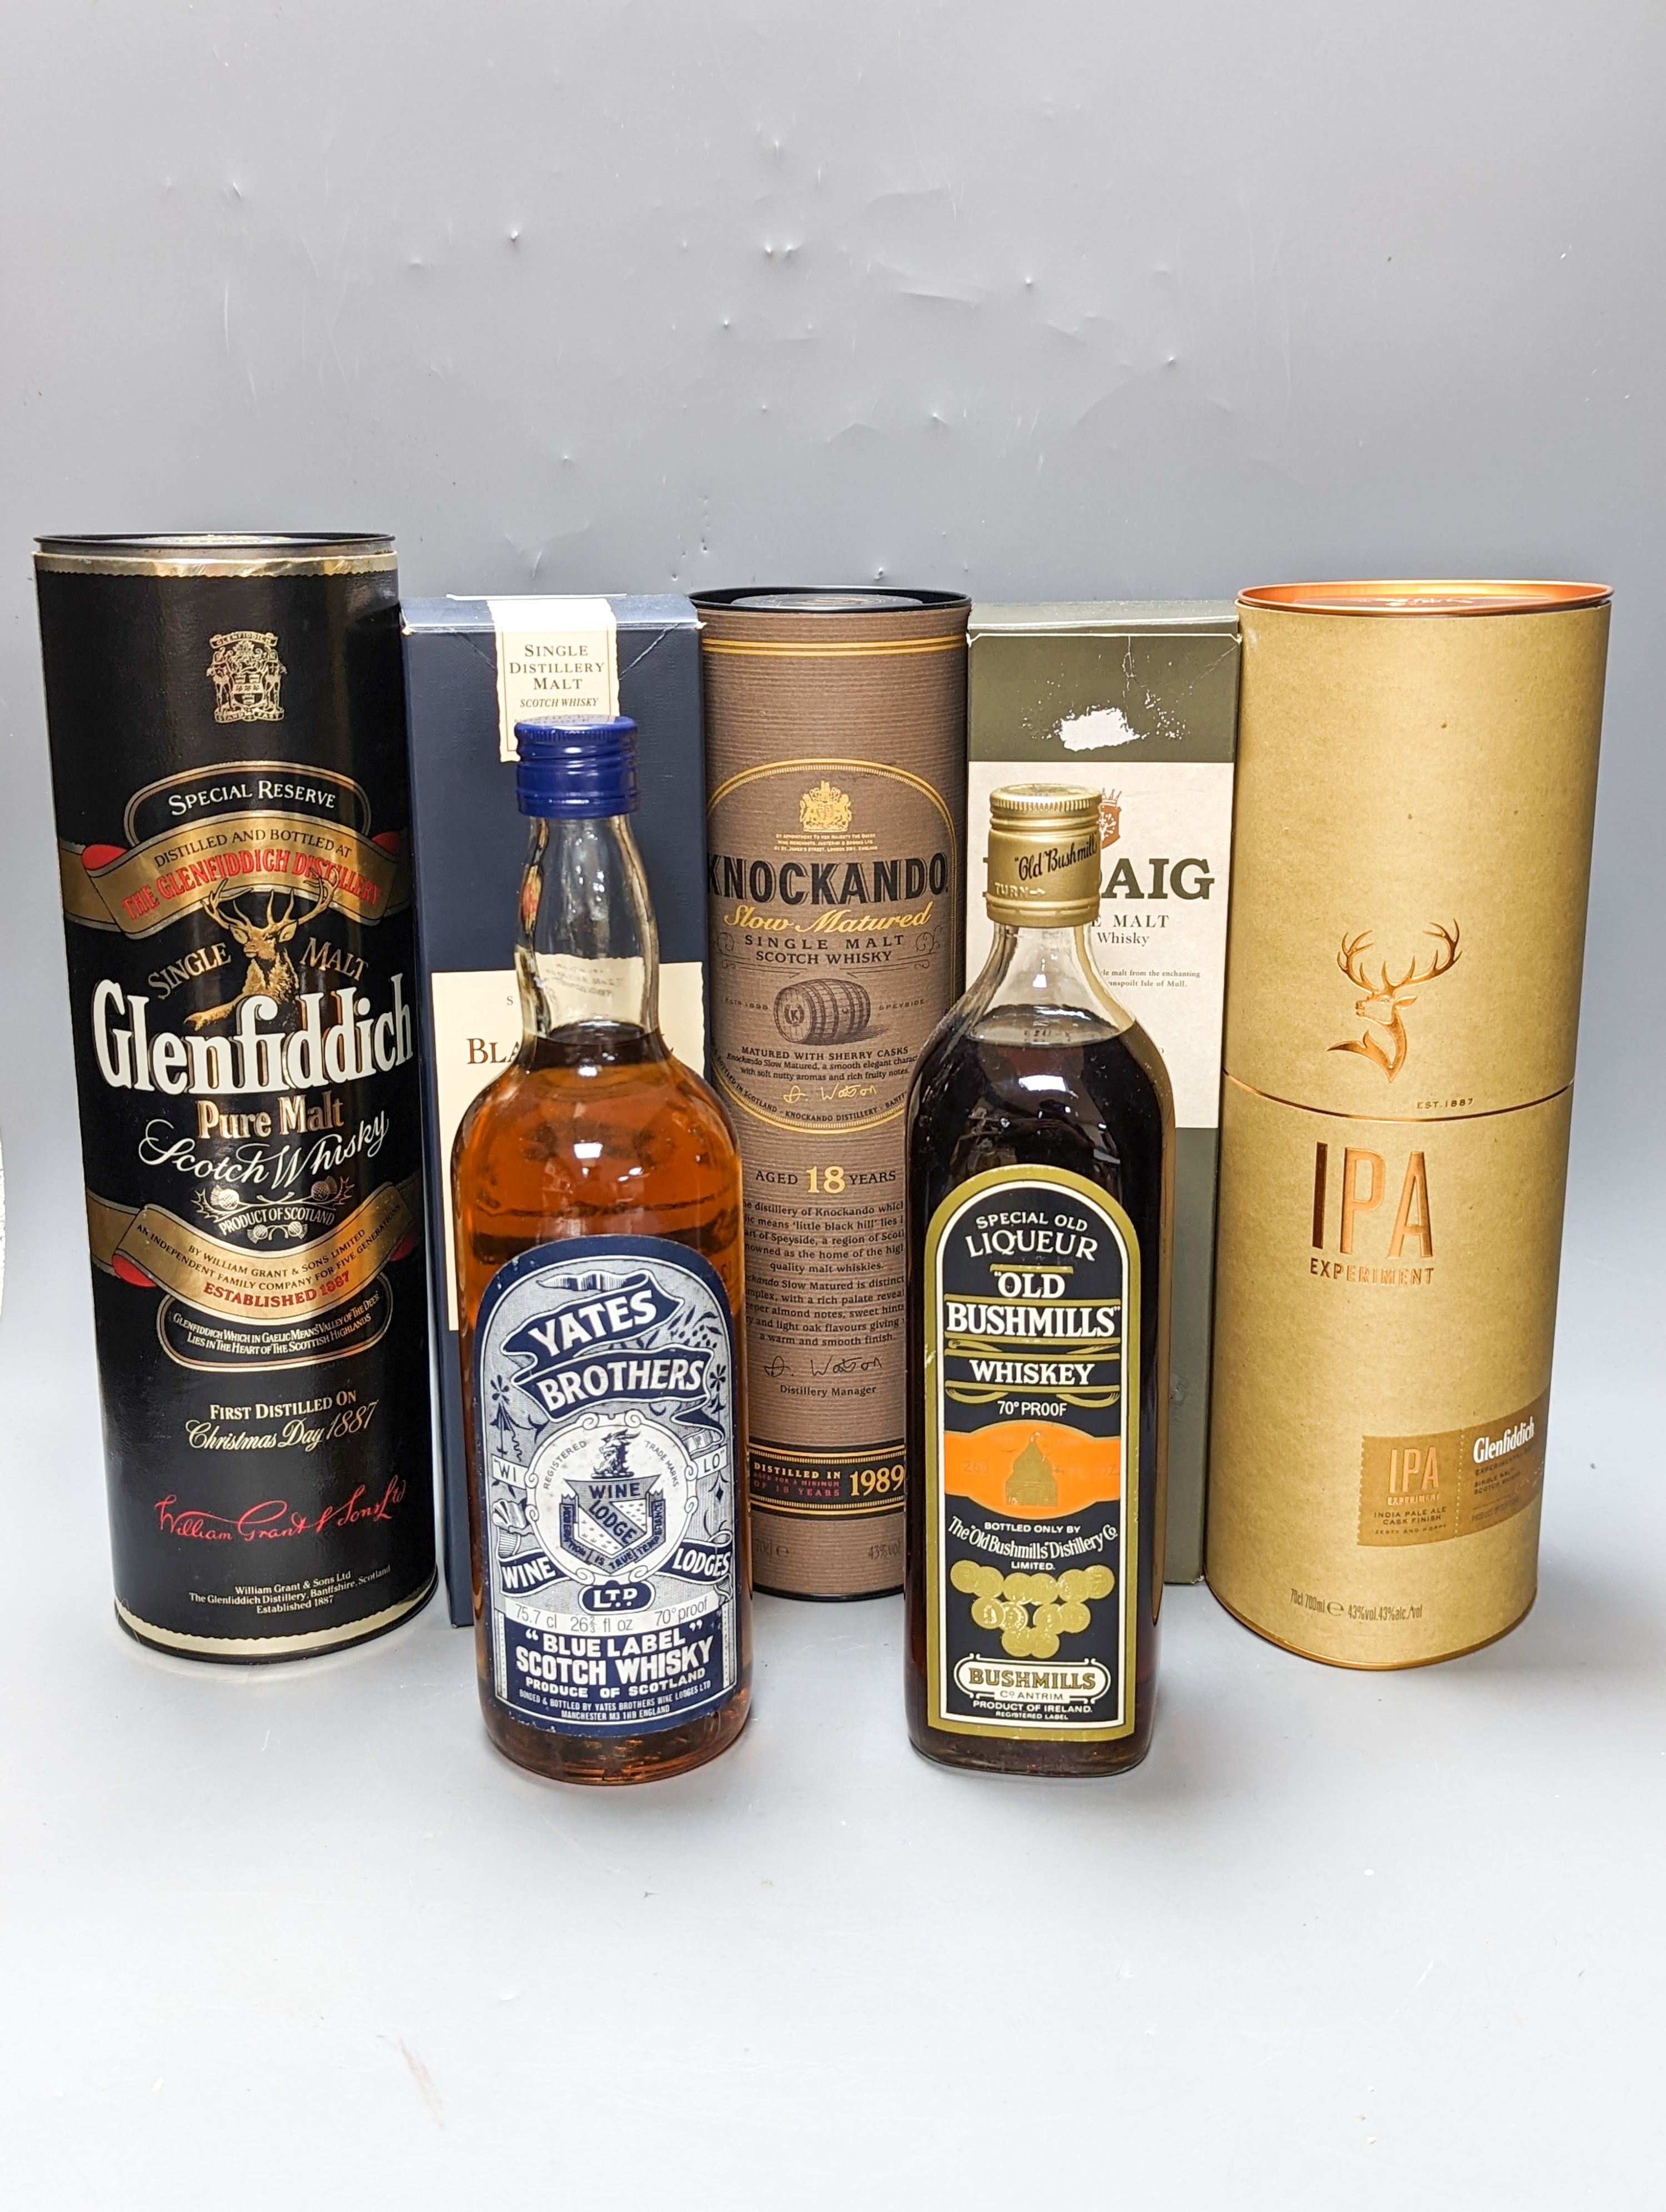 Seven assorted bottles of whisky including Yates Brothers, Bushwalls, IPA single malt, Blair Athol 12 year old single malt, Ledaig single malt, Knockando 18 year old malt and Glenfiddich malt, five boxed.